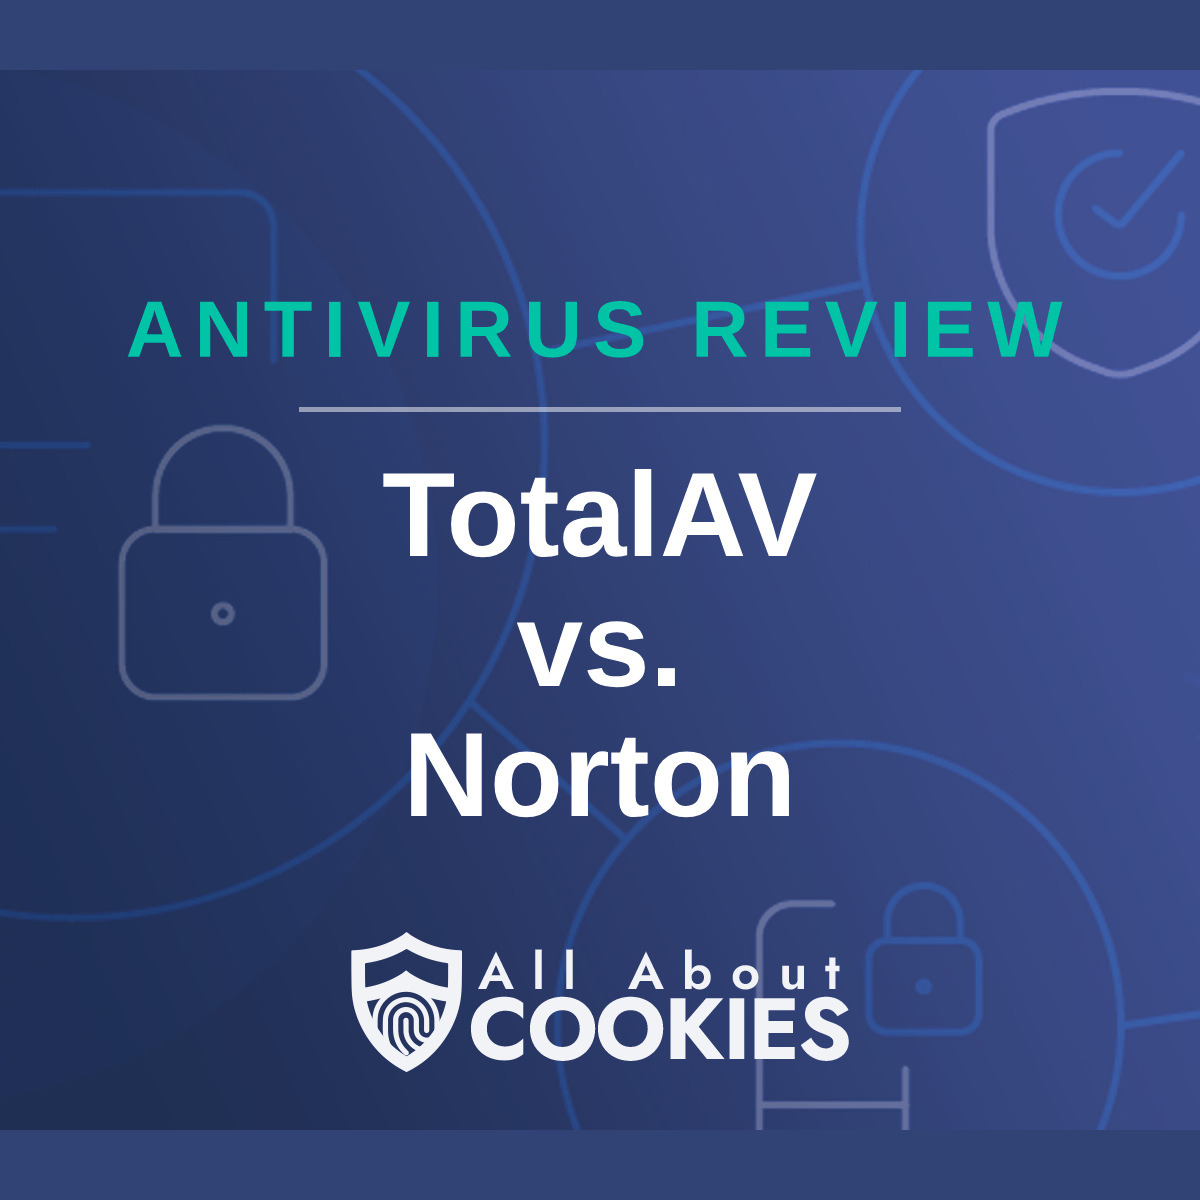 A blue background with images of locks and shields with the text "TotalAV vs. Norton" and the All About Cookies logo. 